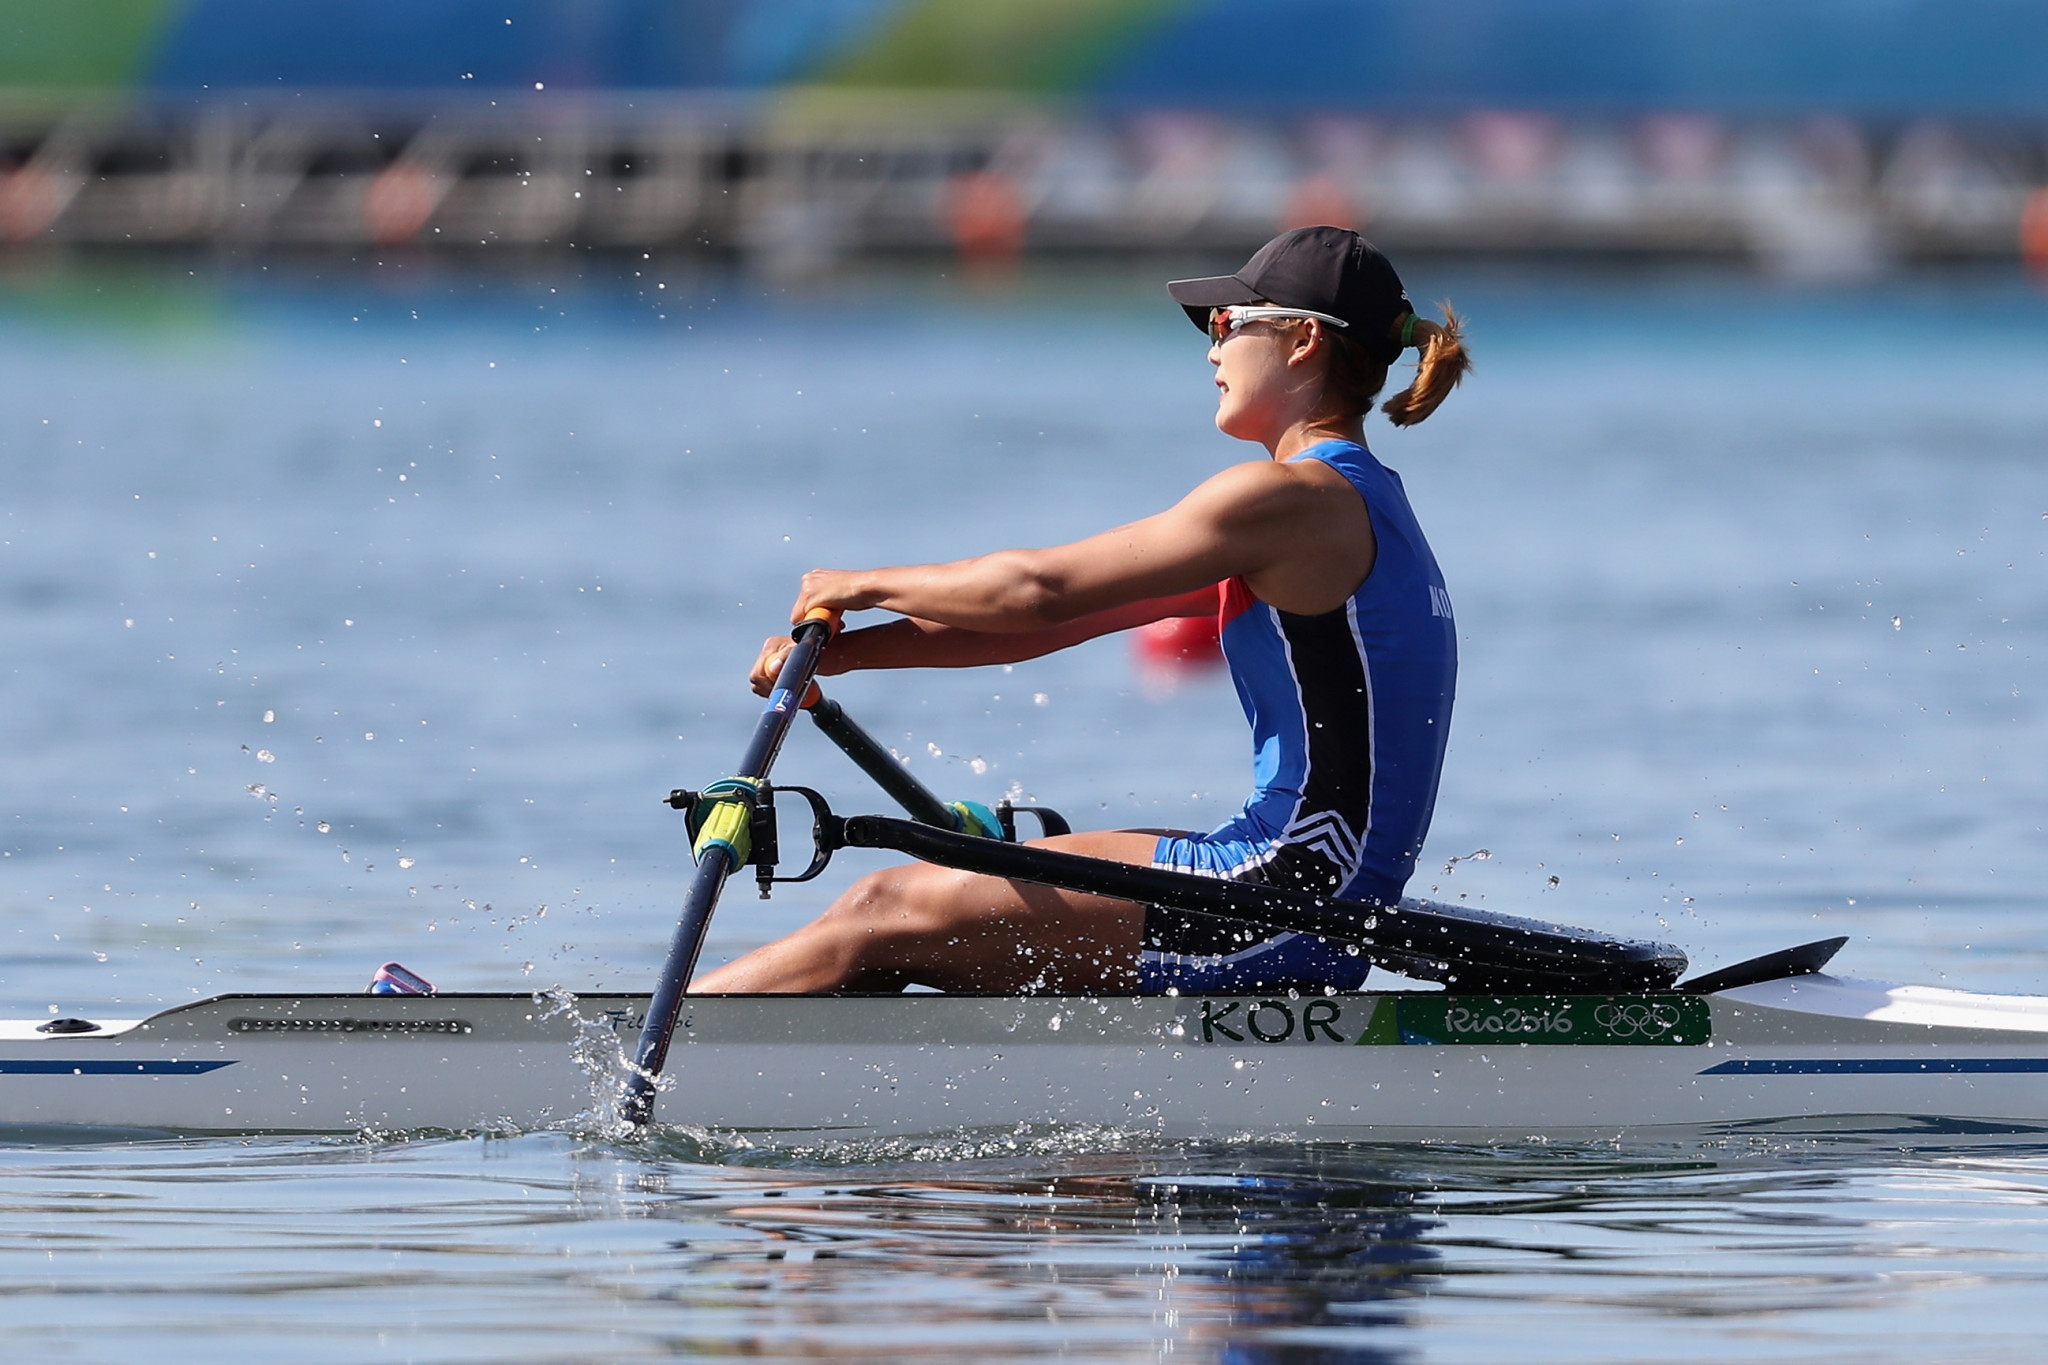 Unified Korean crews cleared to attempt qualification for Tokyo 2020 rowing regatta